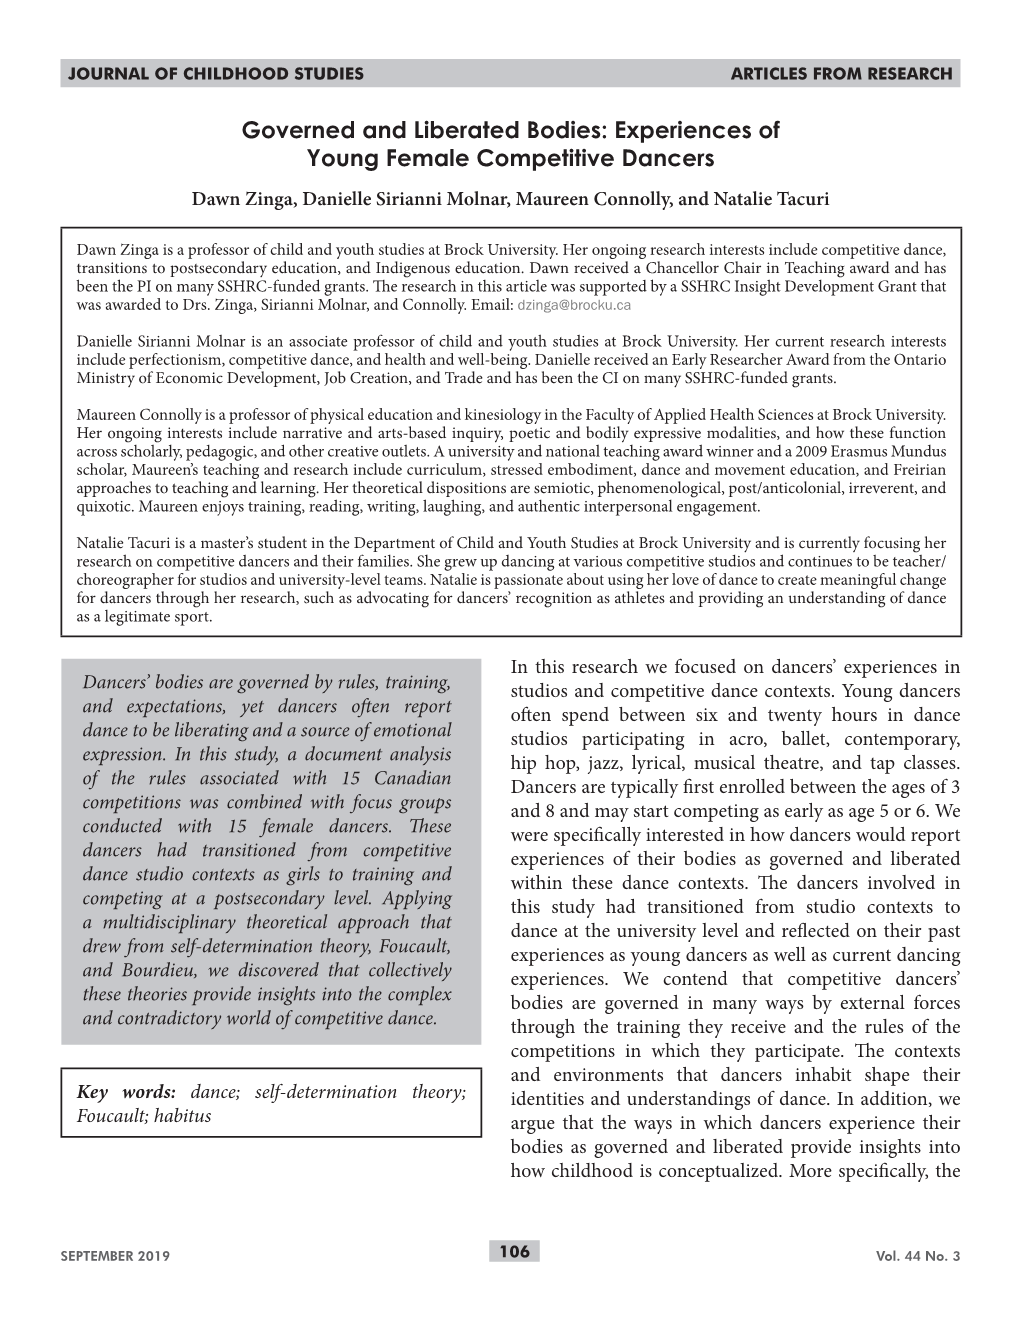 Experiences of Young Female Competitive Dancers Dawn Zinga, Danielle Sirianni Molnar, Maureen Connolly, and Natalie Tacuri